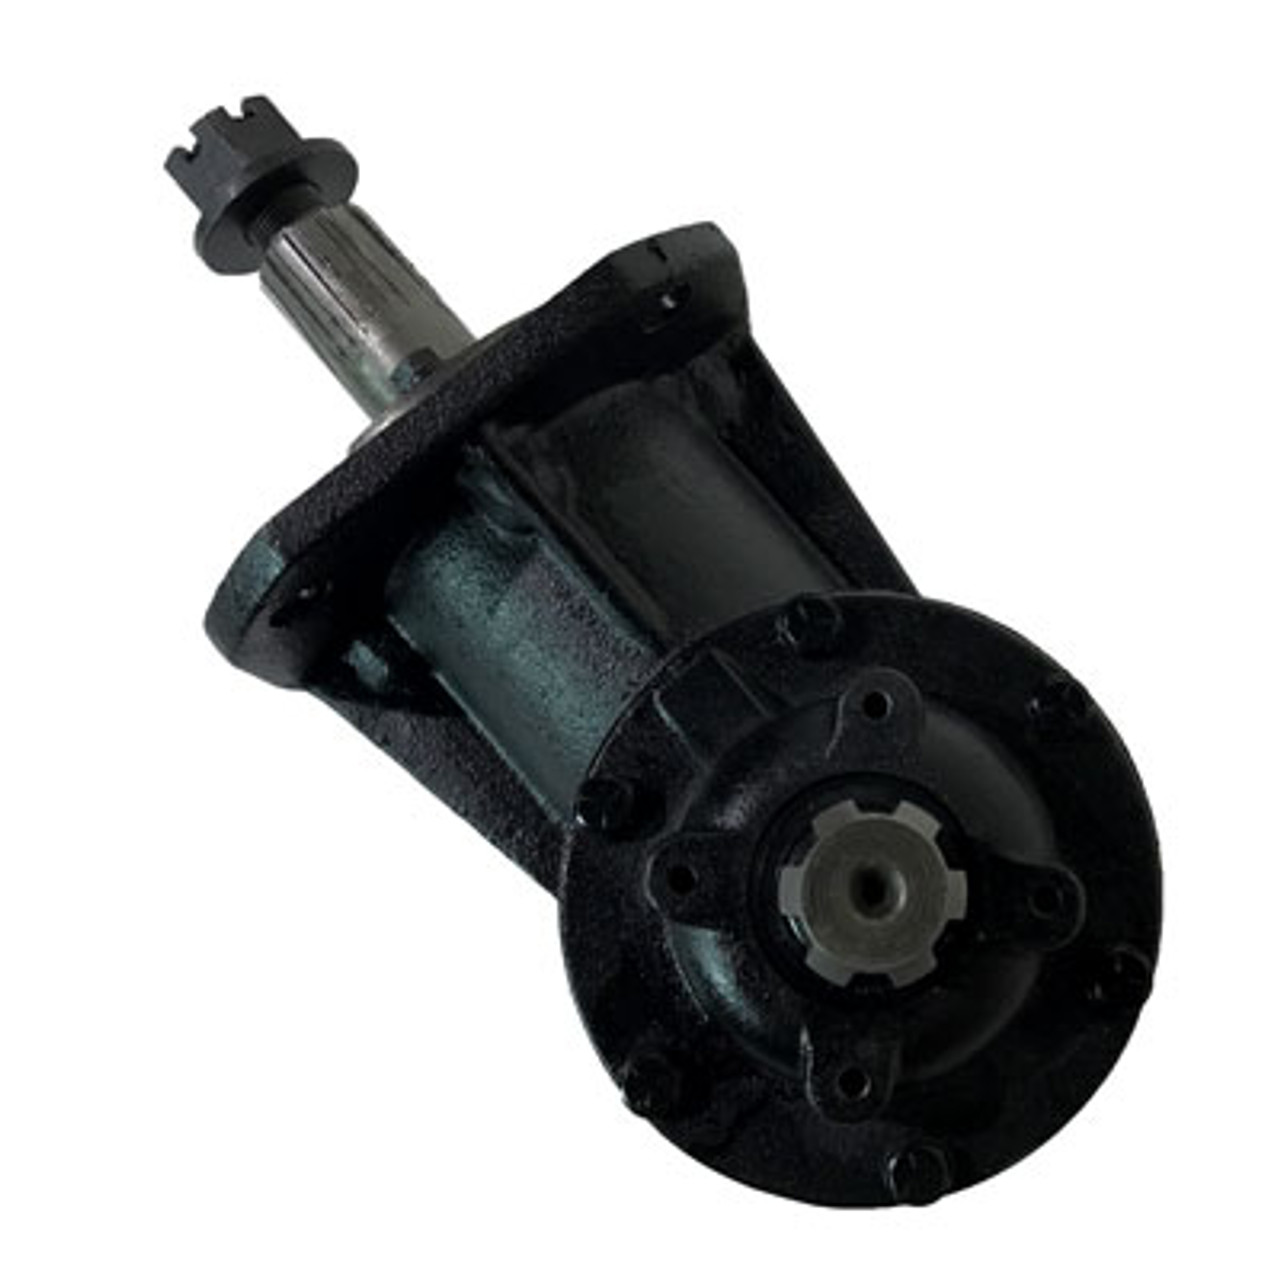 GEARBOX 35HP 1-3/8-6A, Ratio1:1.47 (250179)